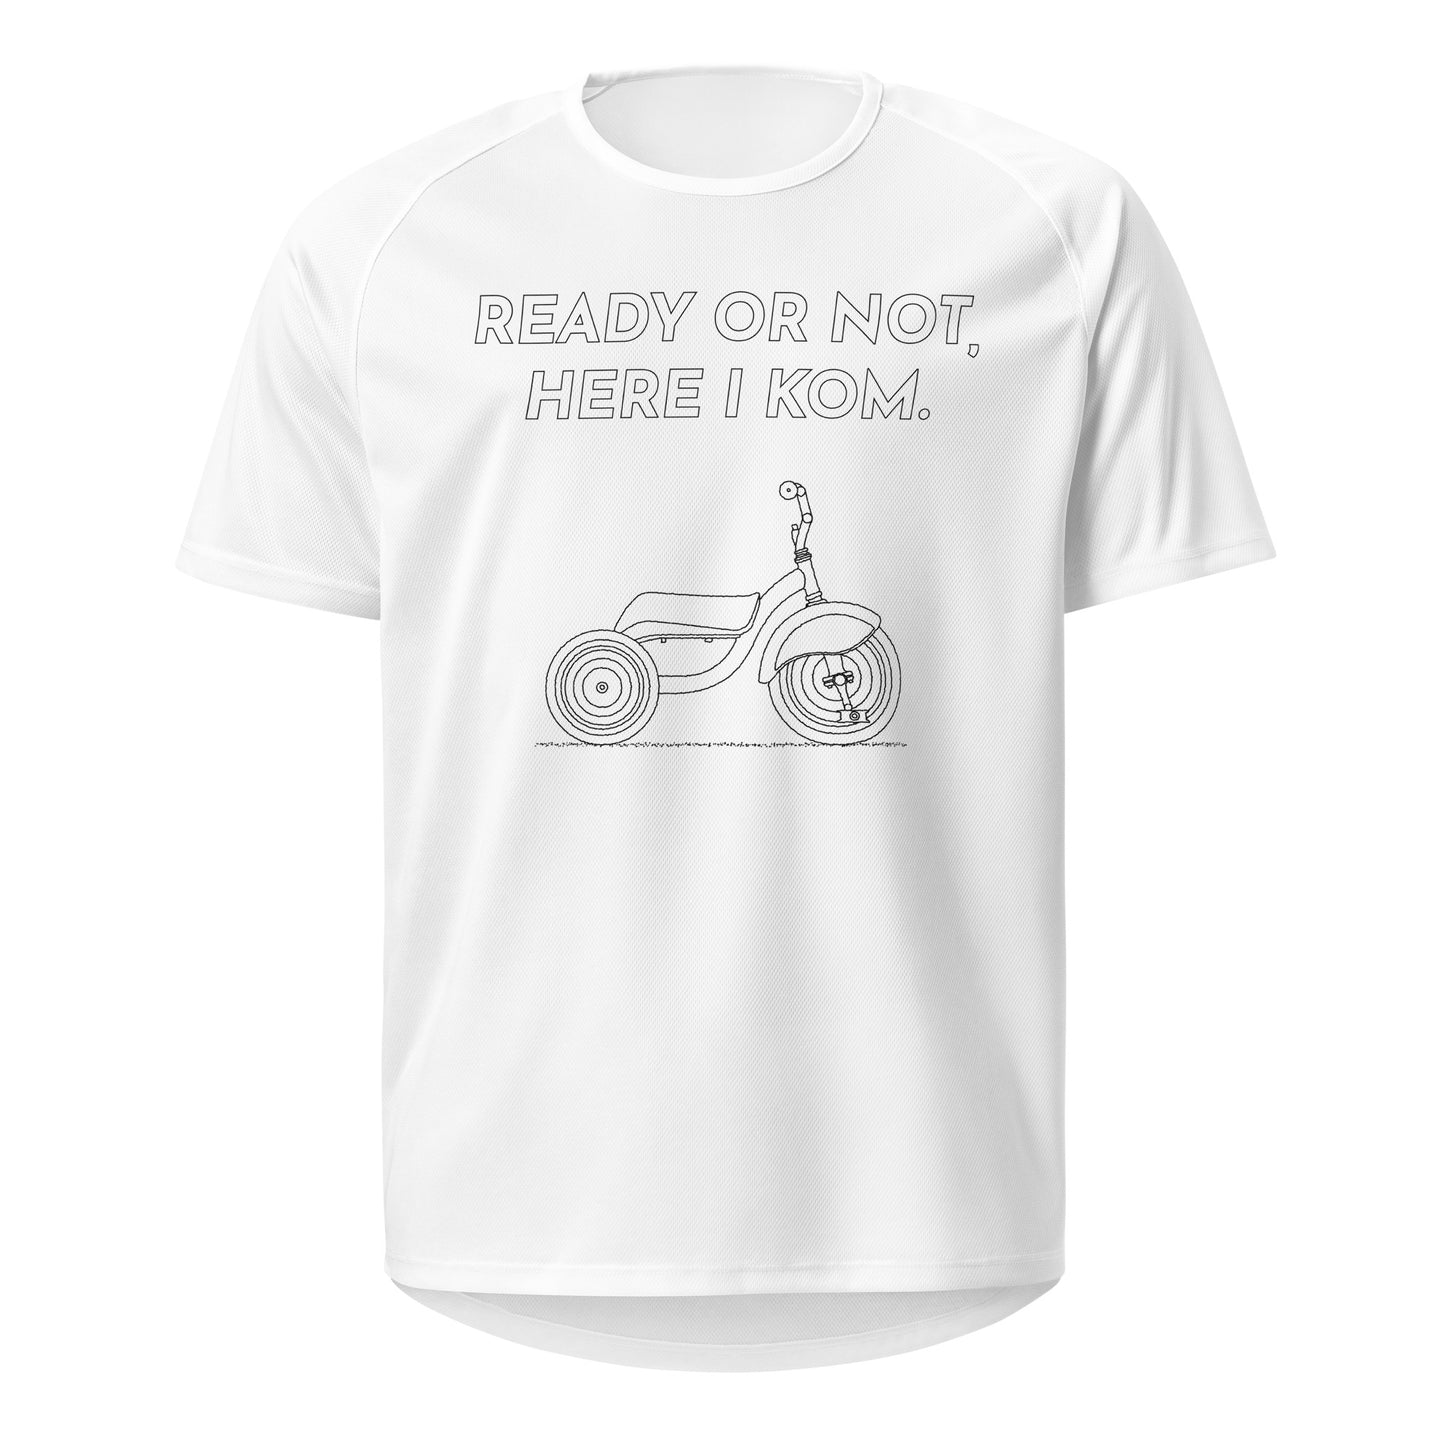 Ready Or Not Here I KOM, Tricycle Sports Jersey, Adult